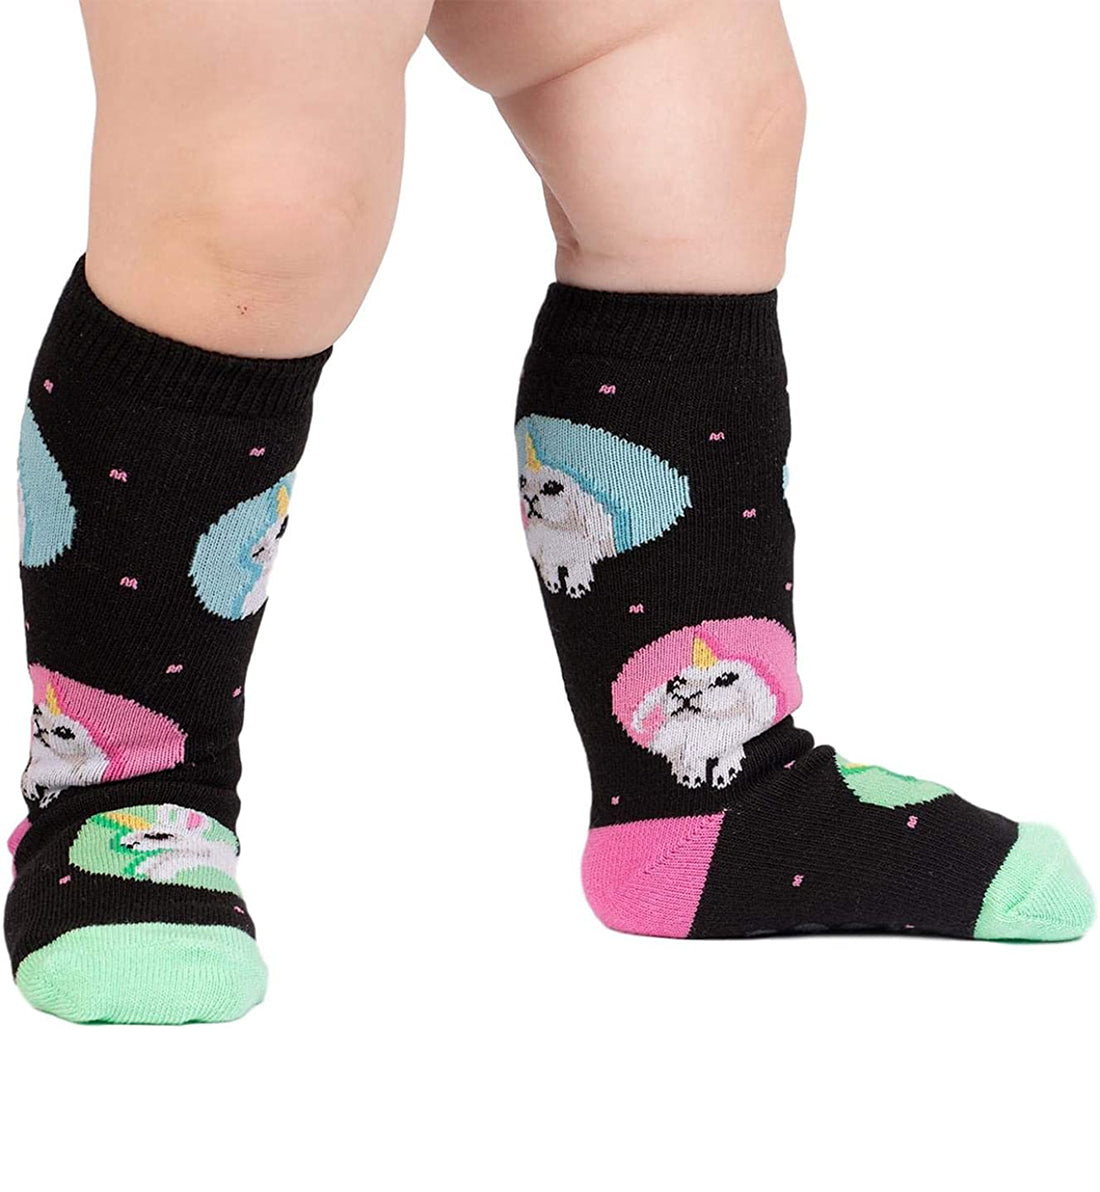 SOCK it to me Toddler Knee High Socks (tk0057),Hop To It - Hop To It,One Size